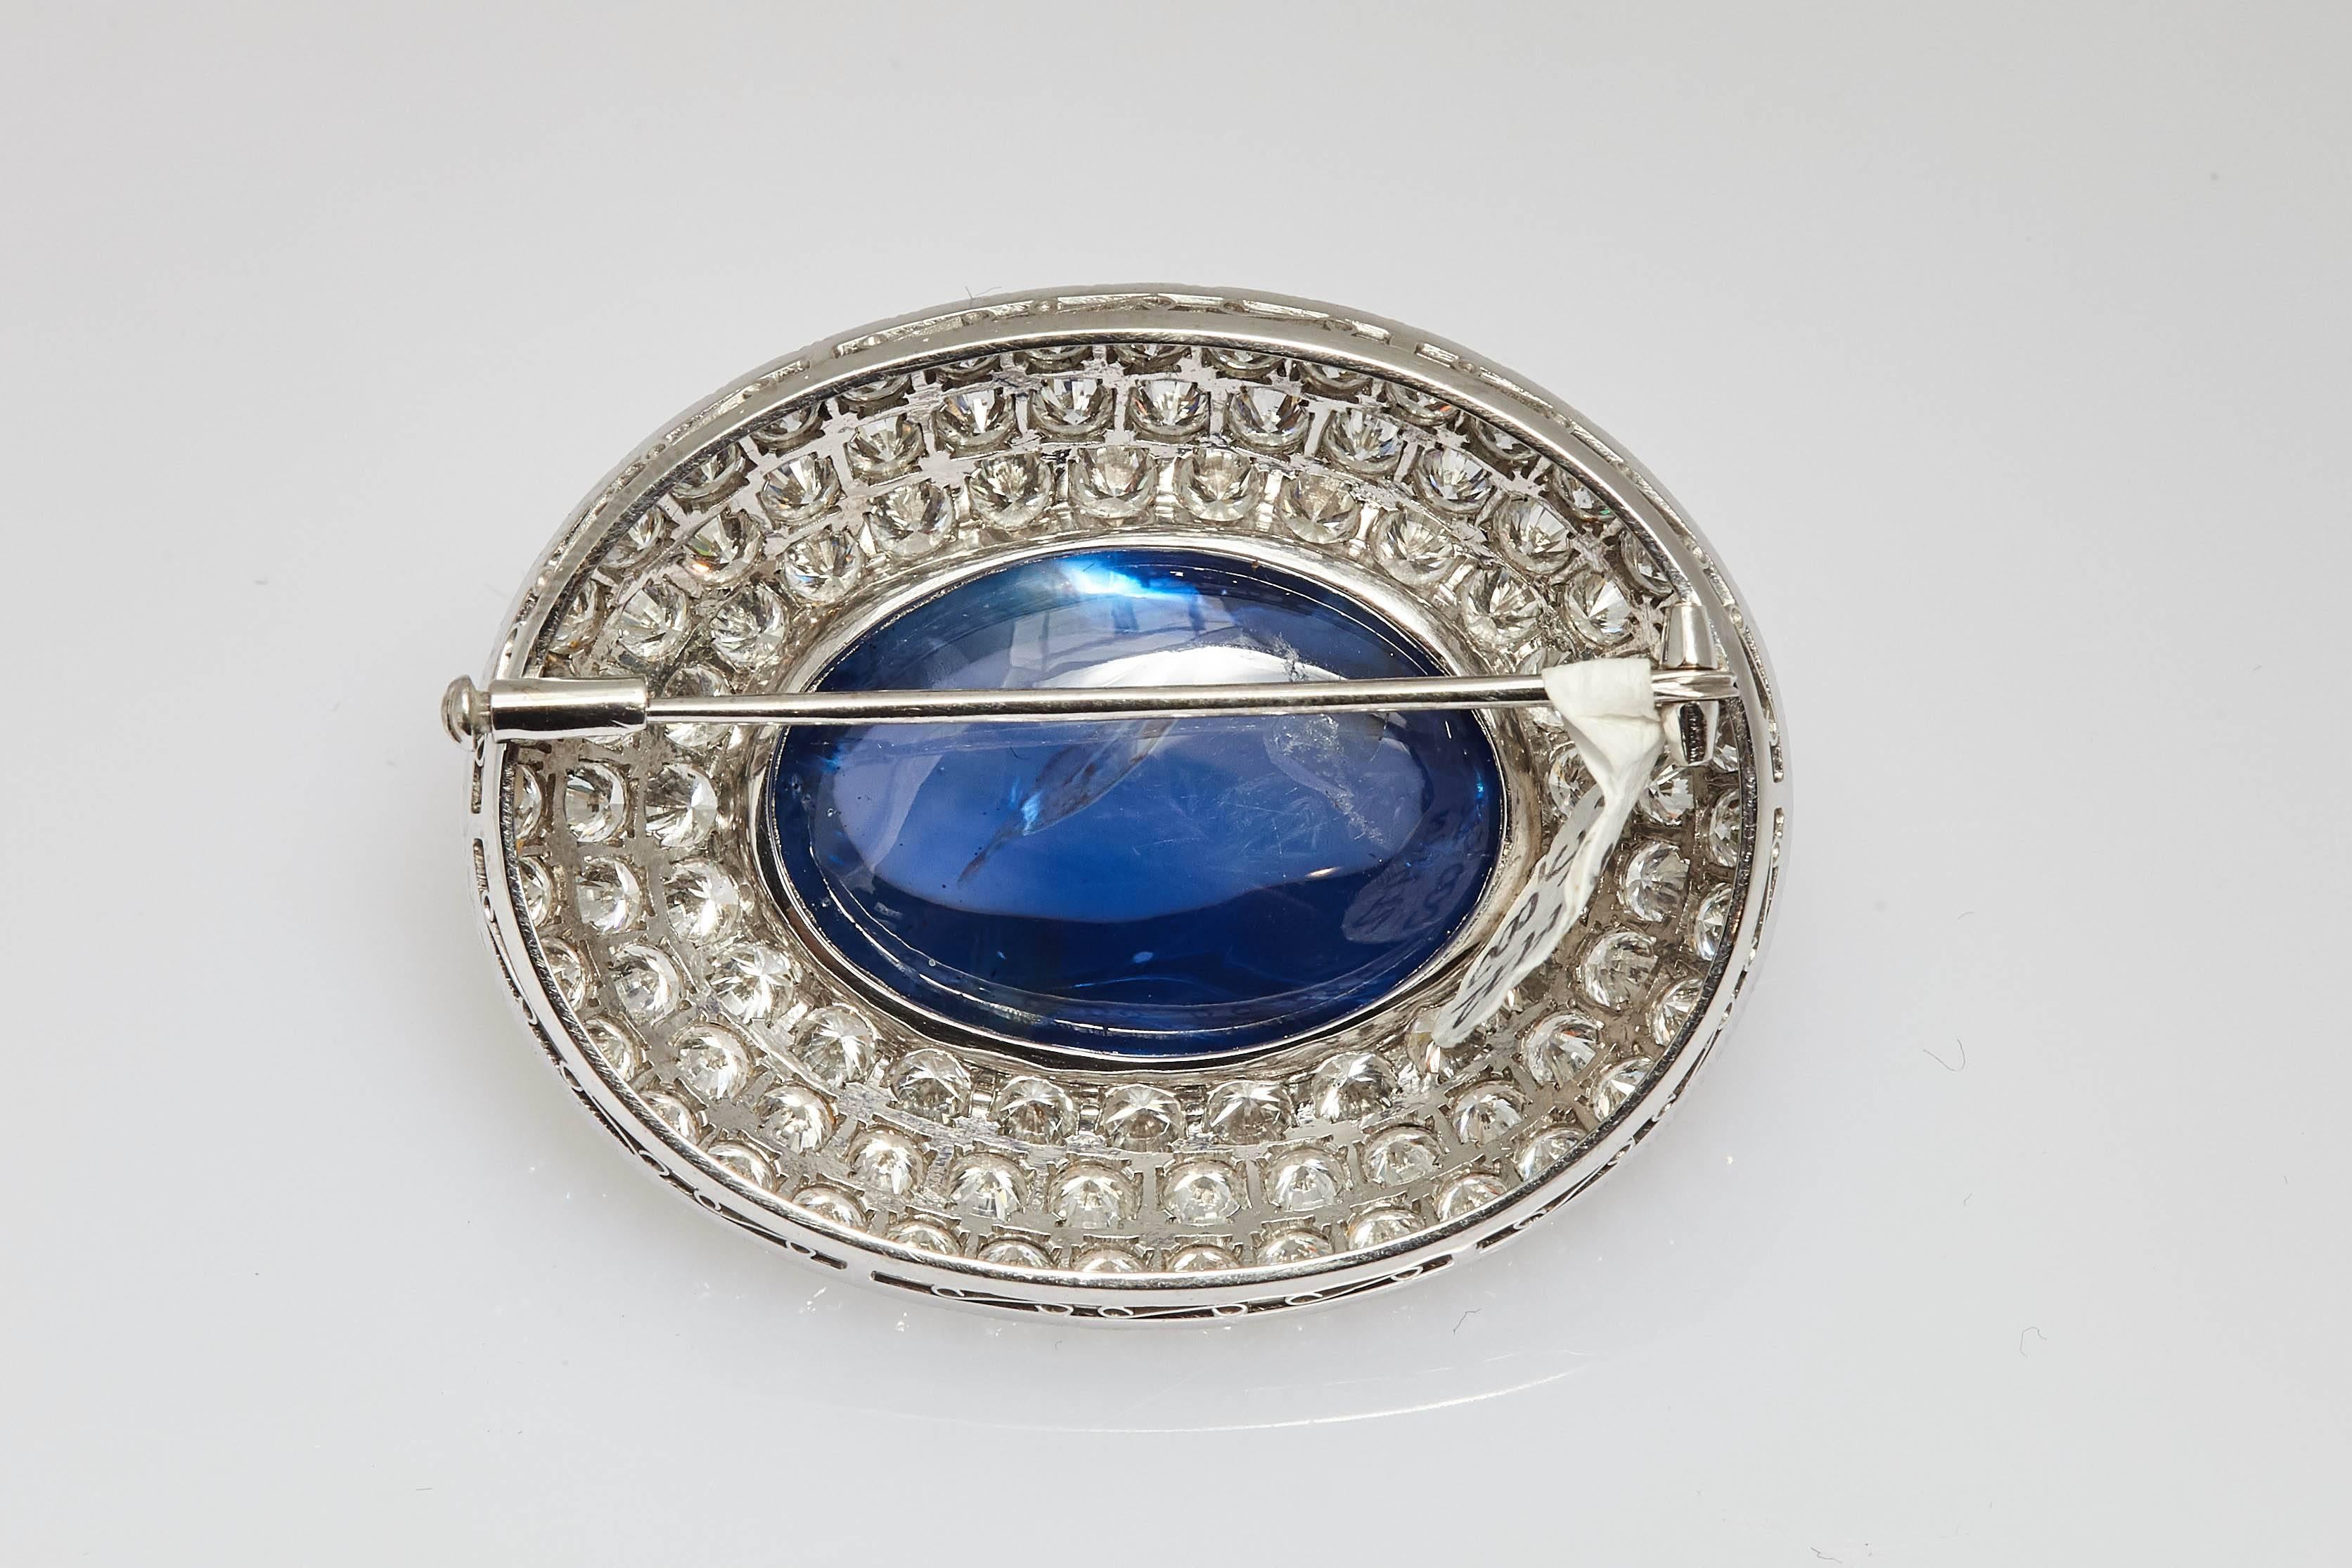 An important diamond and natural (no heat/treat) Ceylon sapphire brooch, mounted on 18kt white gold. The sapphire weighs approx 60cts. Made in Italy, circa 1965.